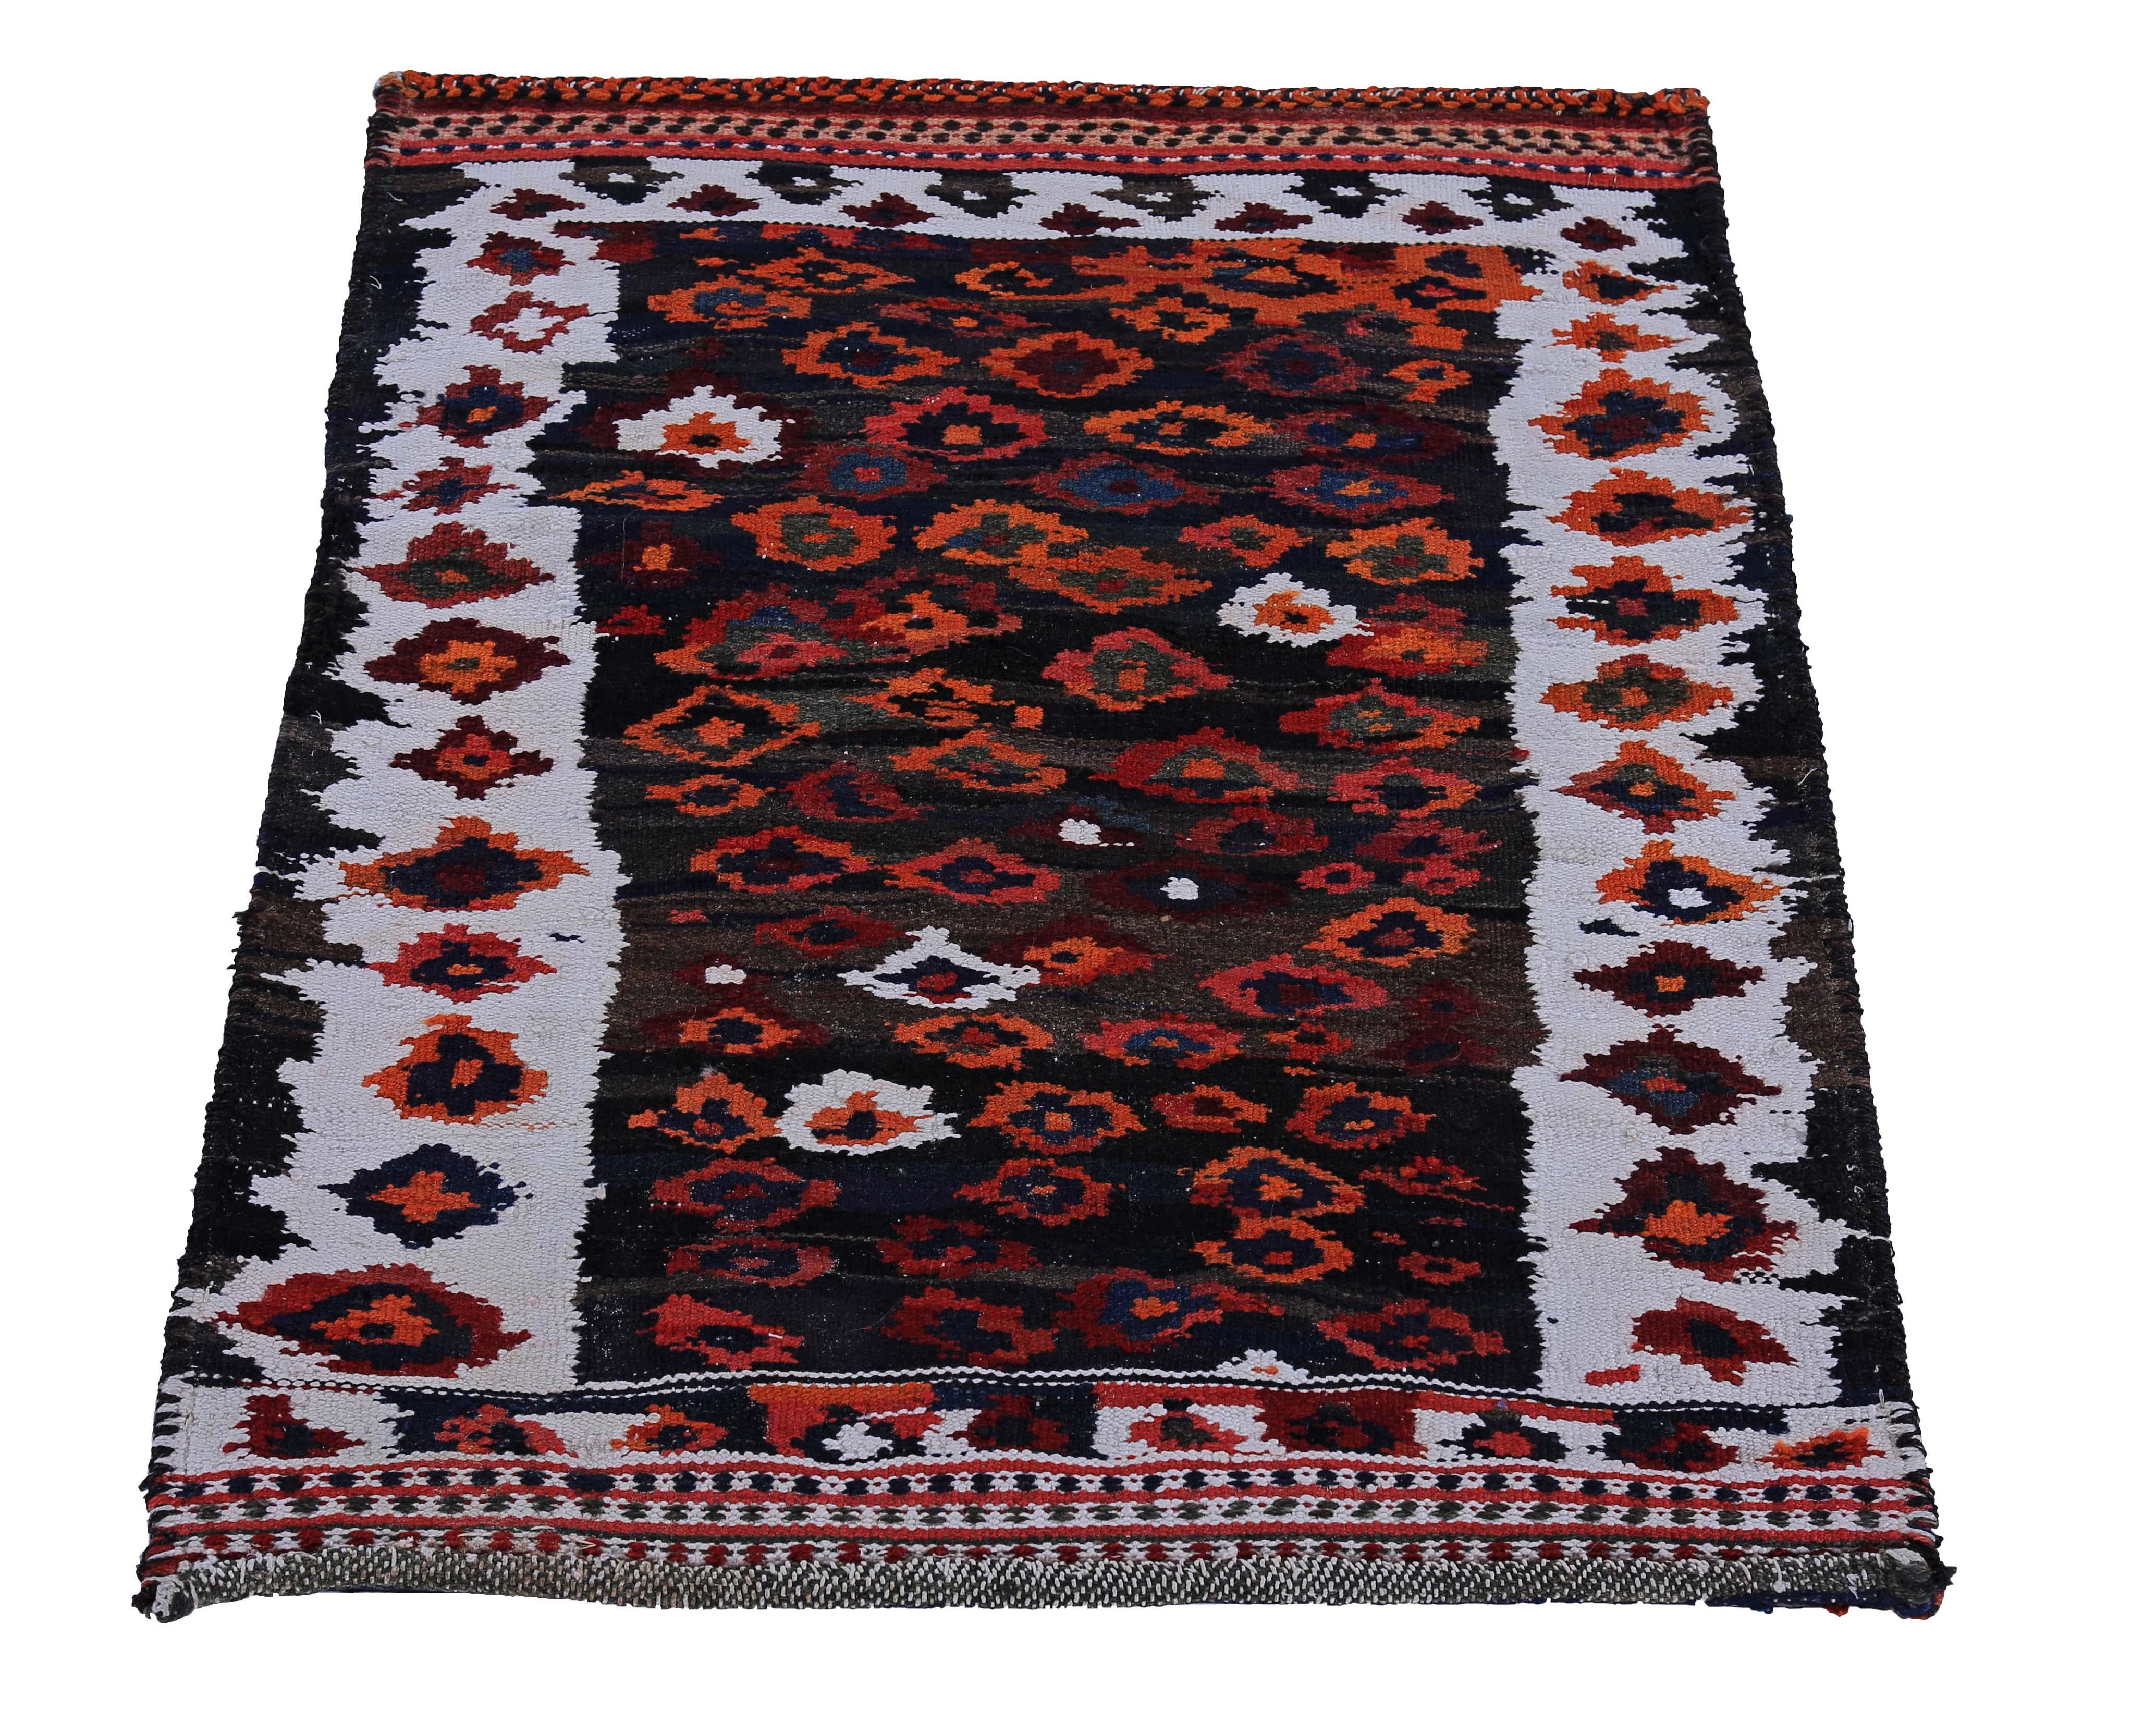 Modern Turkish rug handwoven from the finest sheep’s wool and colored with all-natural vegetable dyes that are safe for humans and pets. It’s a traditional Kilim flat-weave design in orange and red floral pattern. It’s a stunning piece to get for